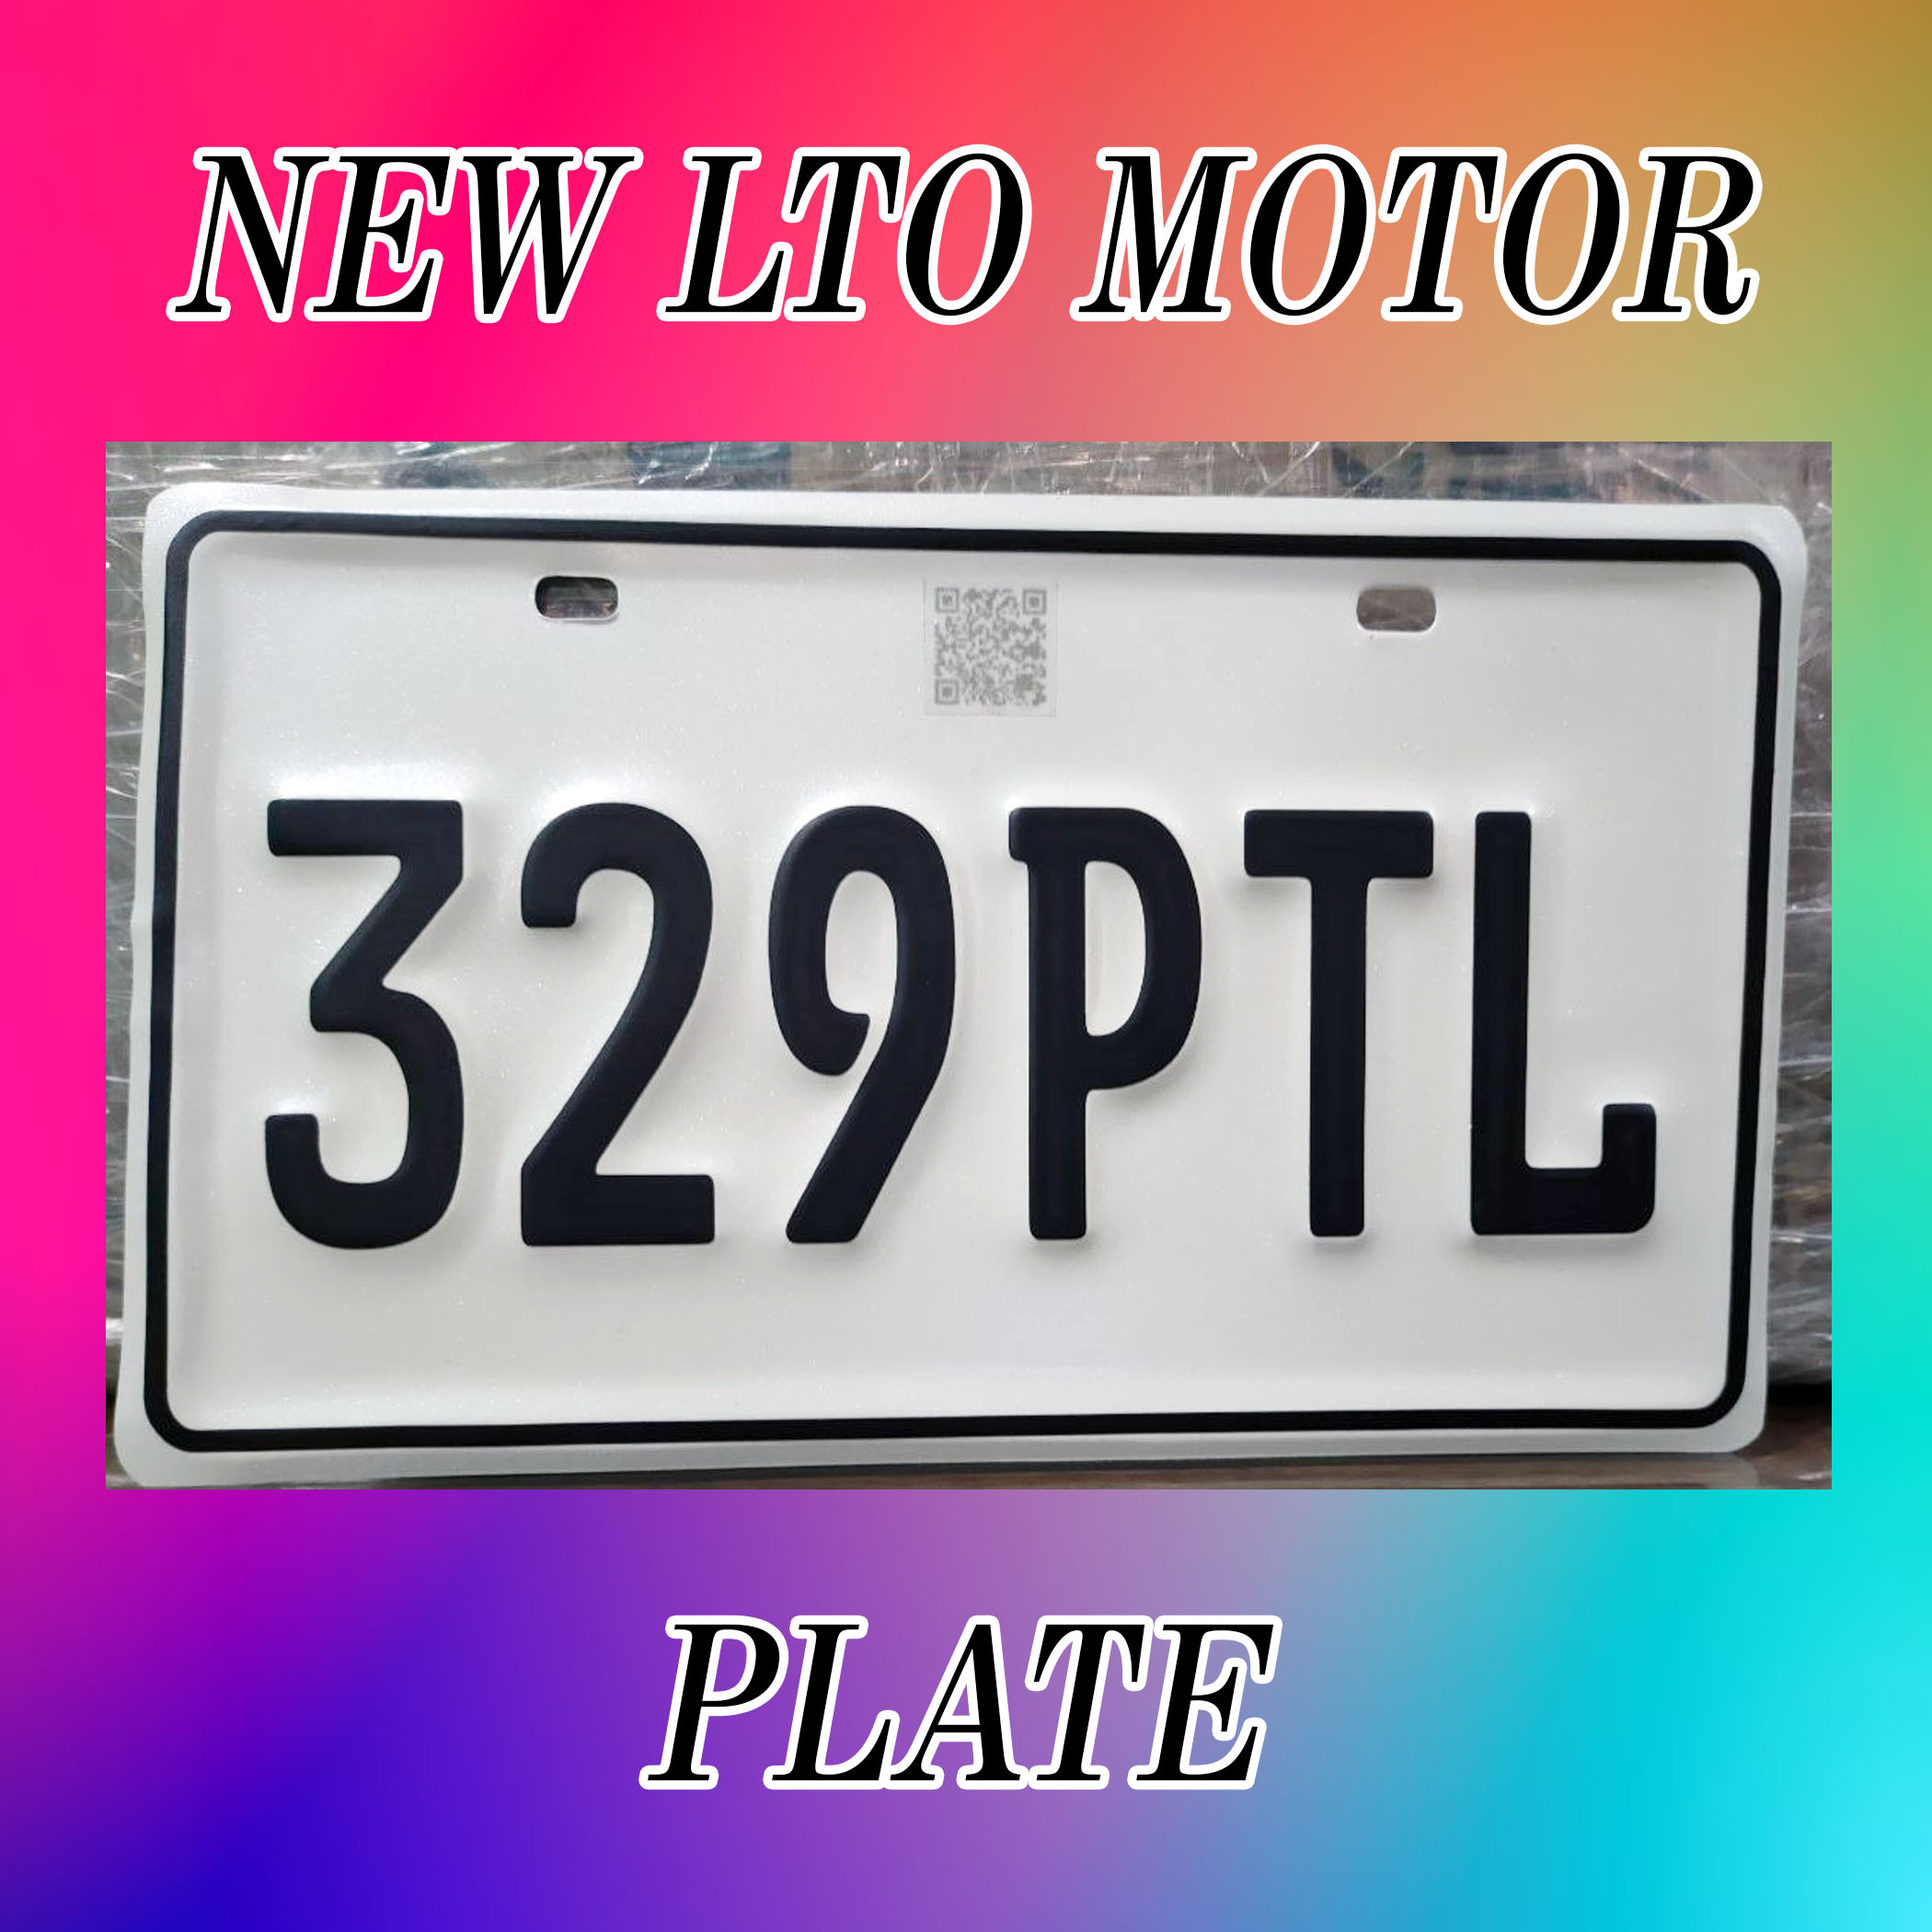 lto-motorcycle-temporary-plate-format-reviewmotors-co